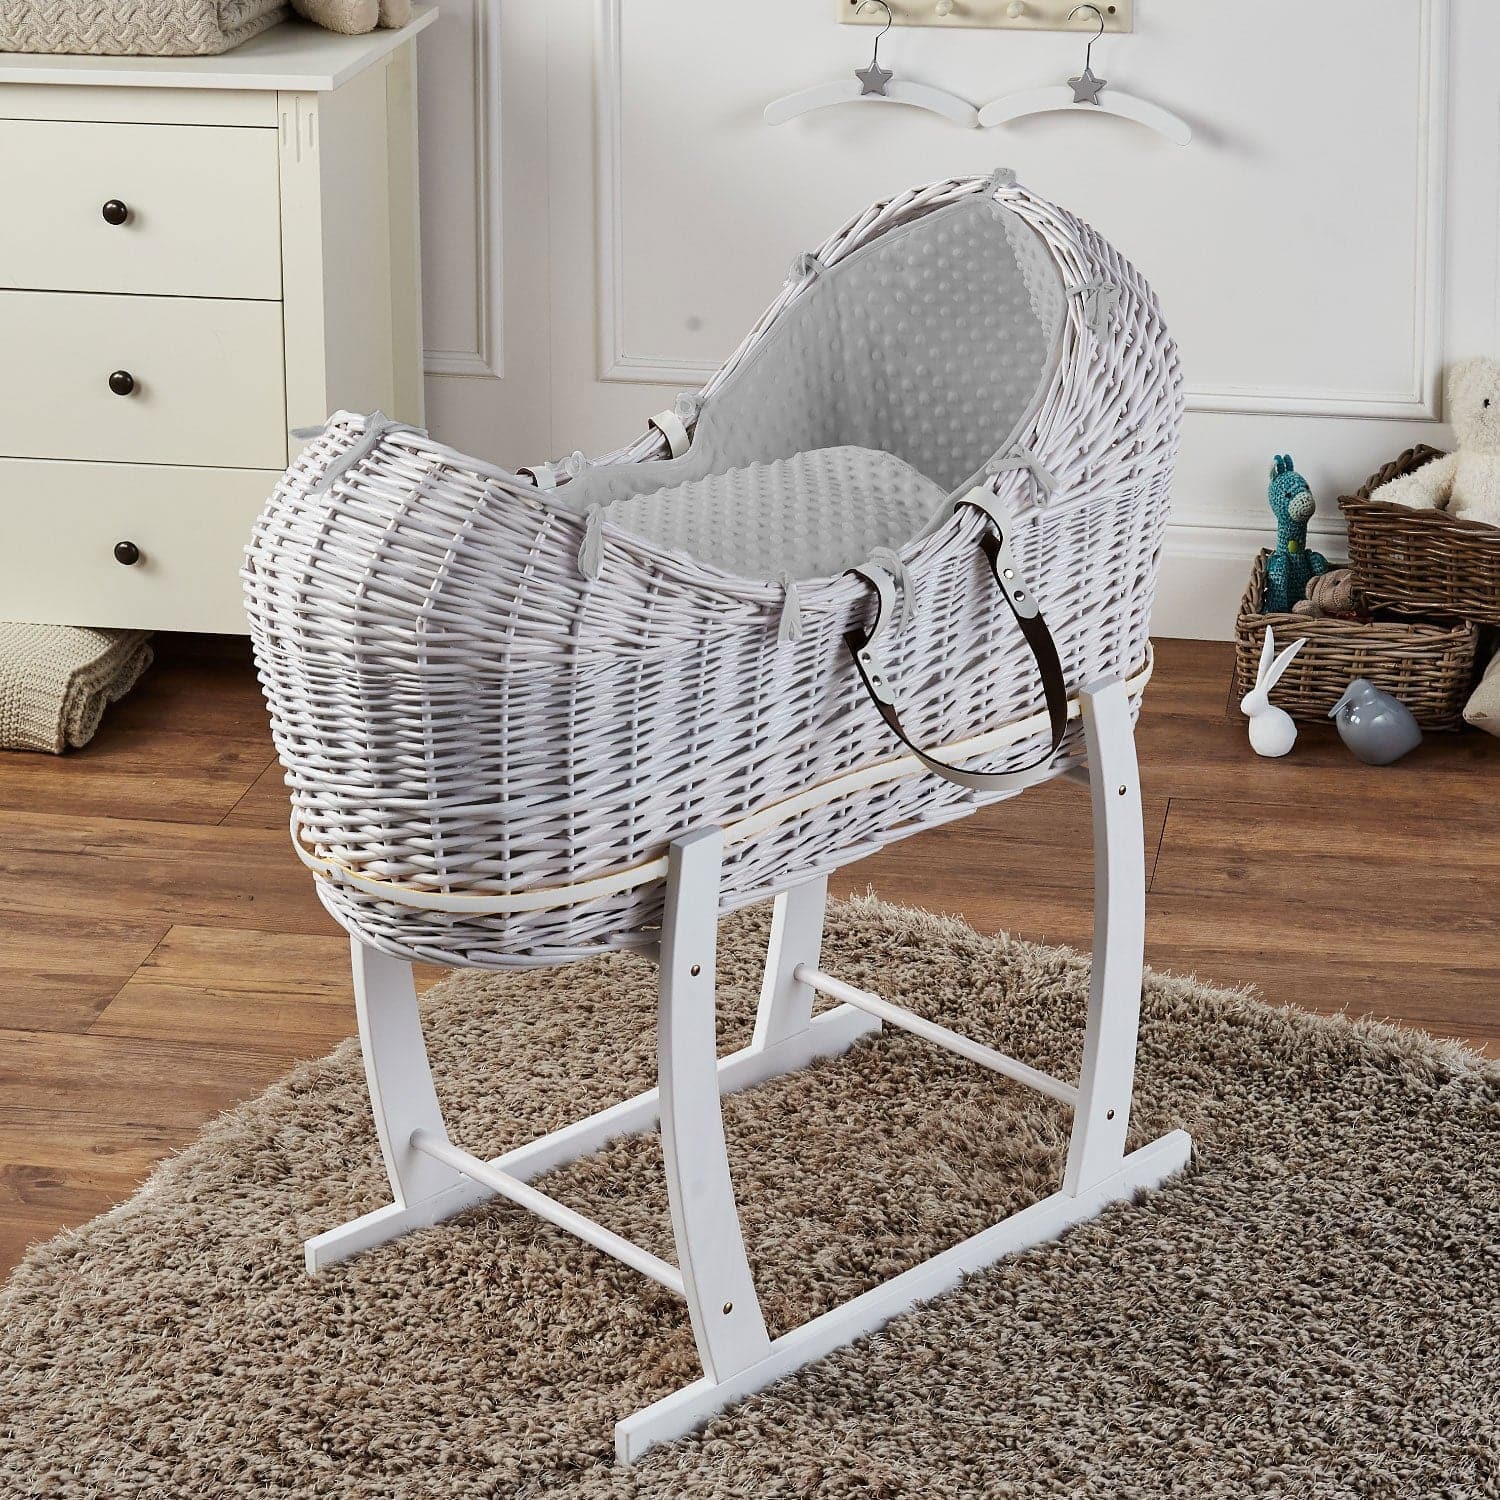 Wicker Deluxe Pod Baby Moses Basket With Stand - White / Dimple / Grey | For Your Little One